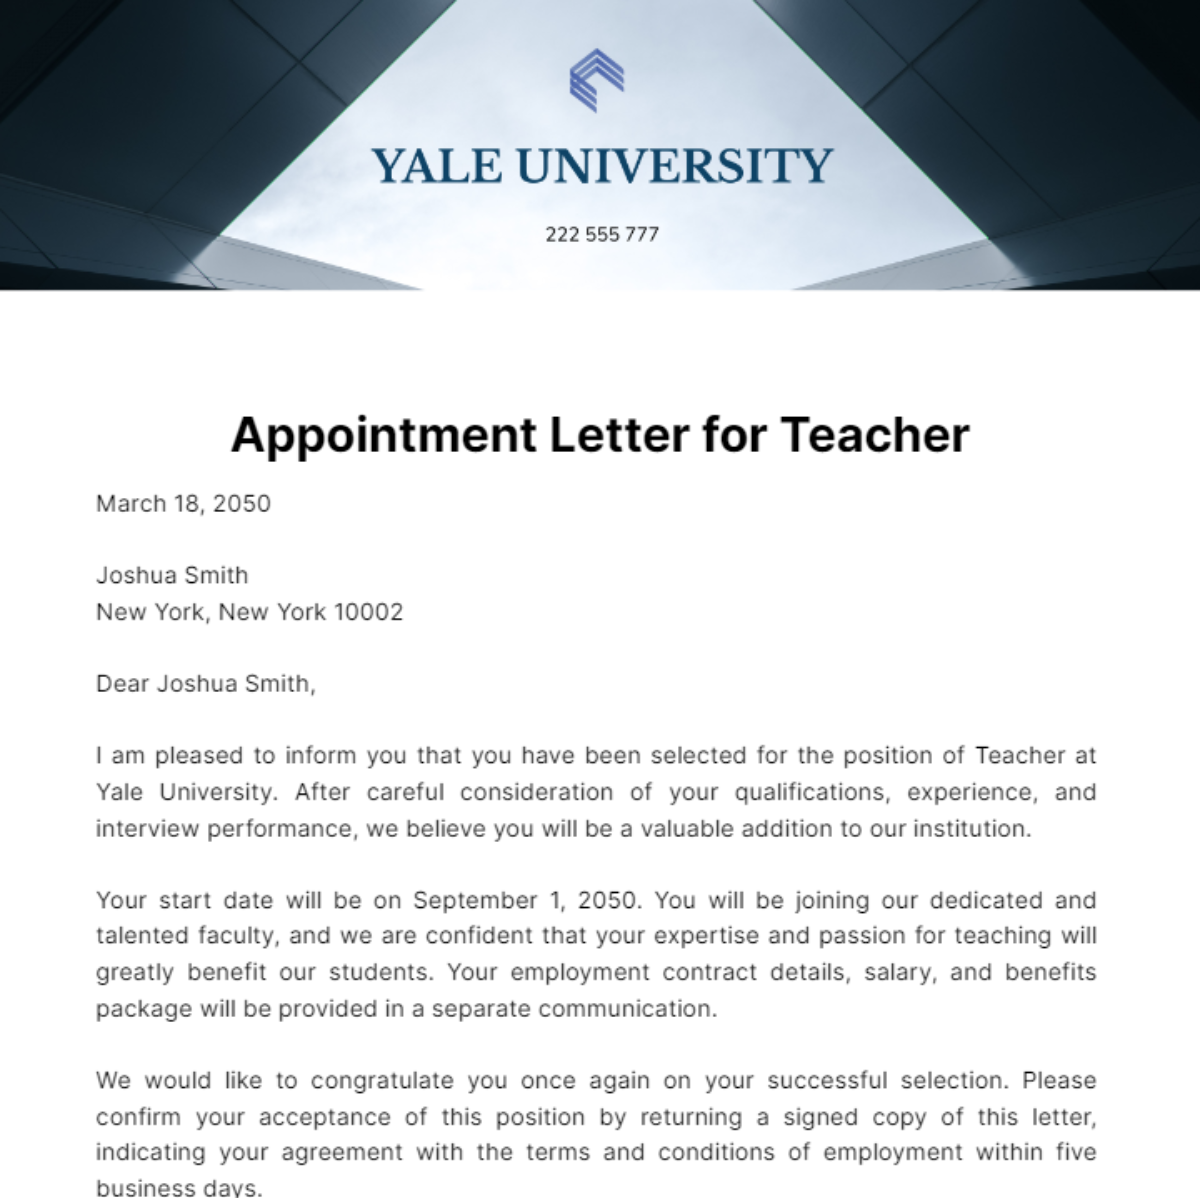 Appointment Letter for Teacher Template